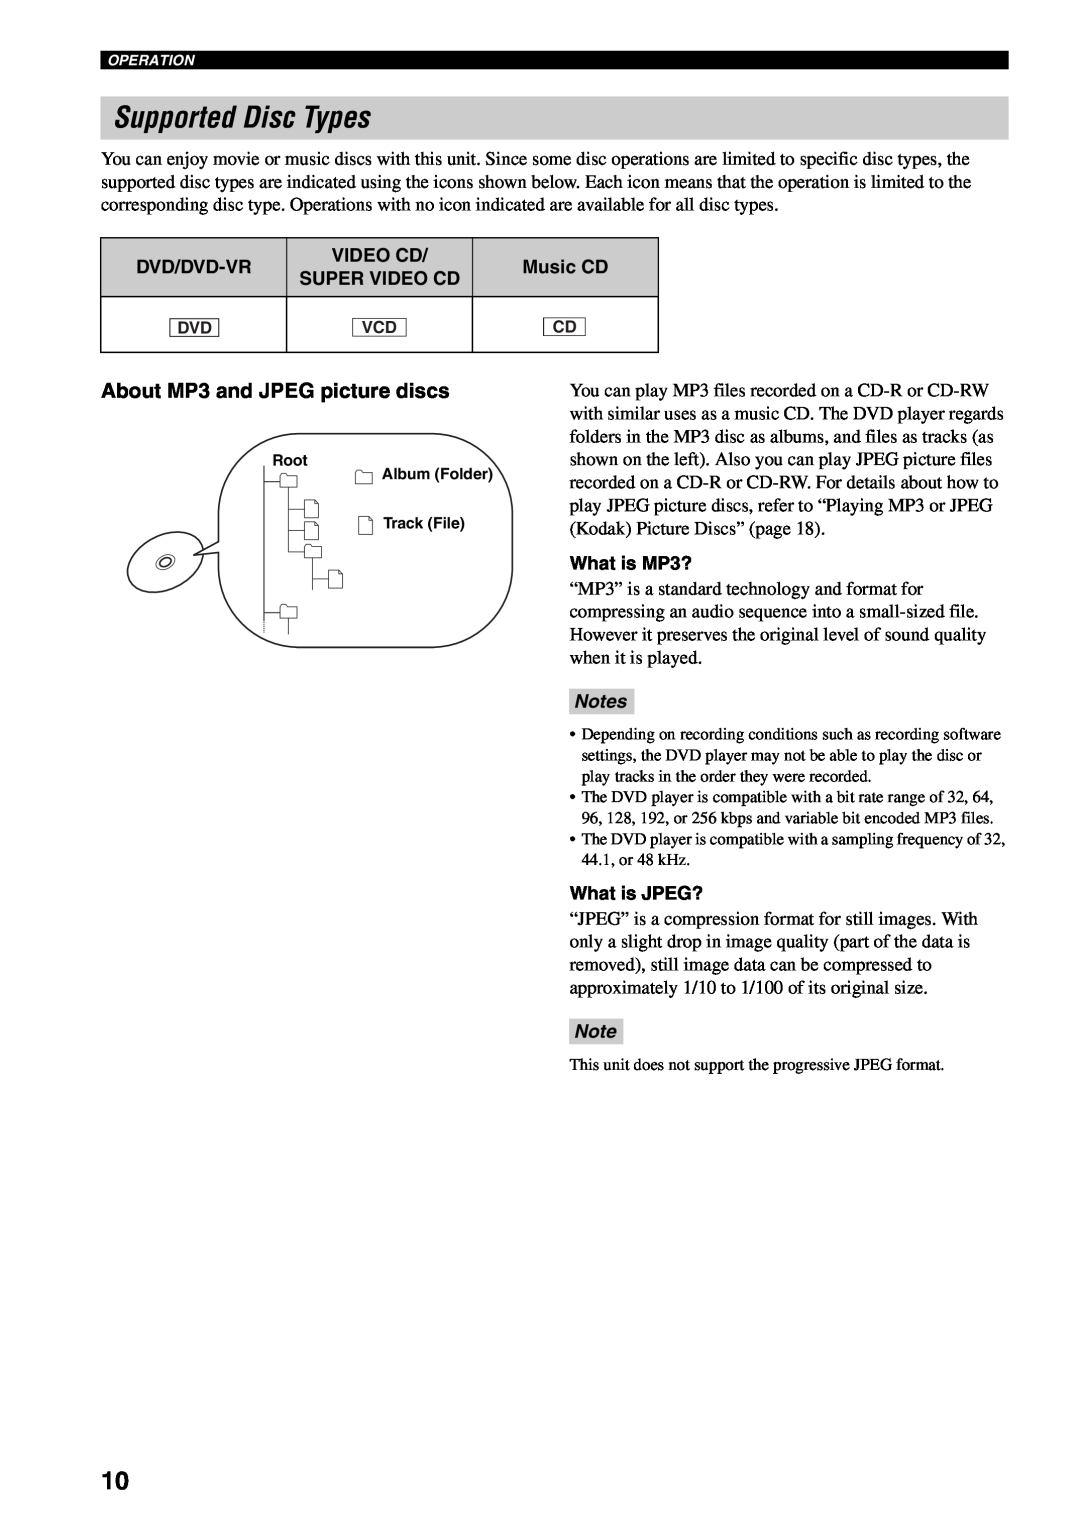 Yamaha AVX-S30 owner manual Supported Disc Types, About MP3 and JPEG picture discs, Notes 